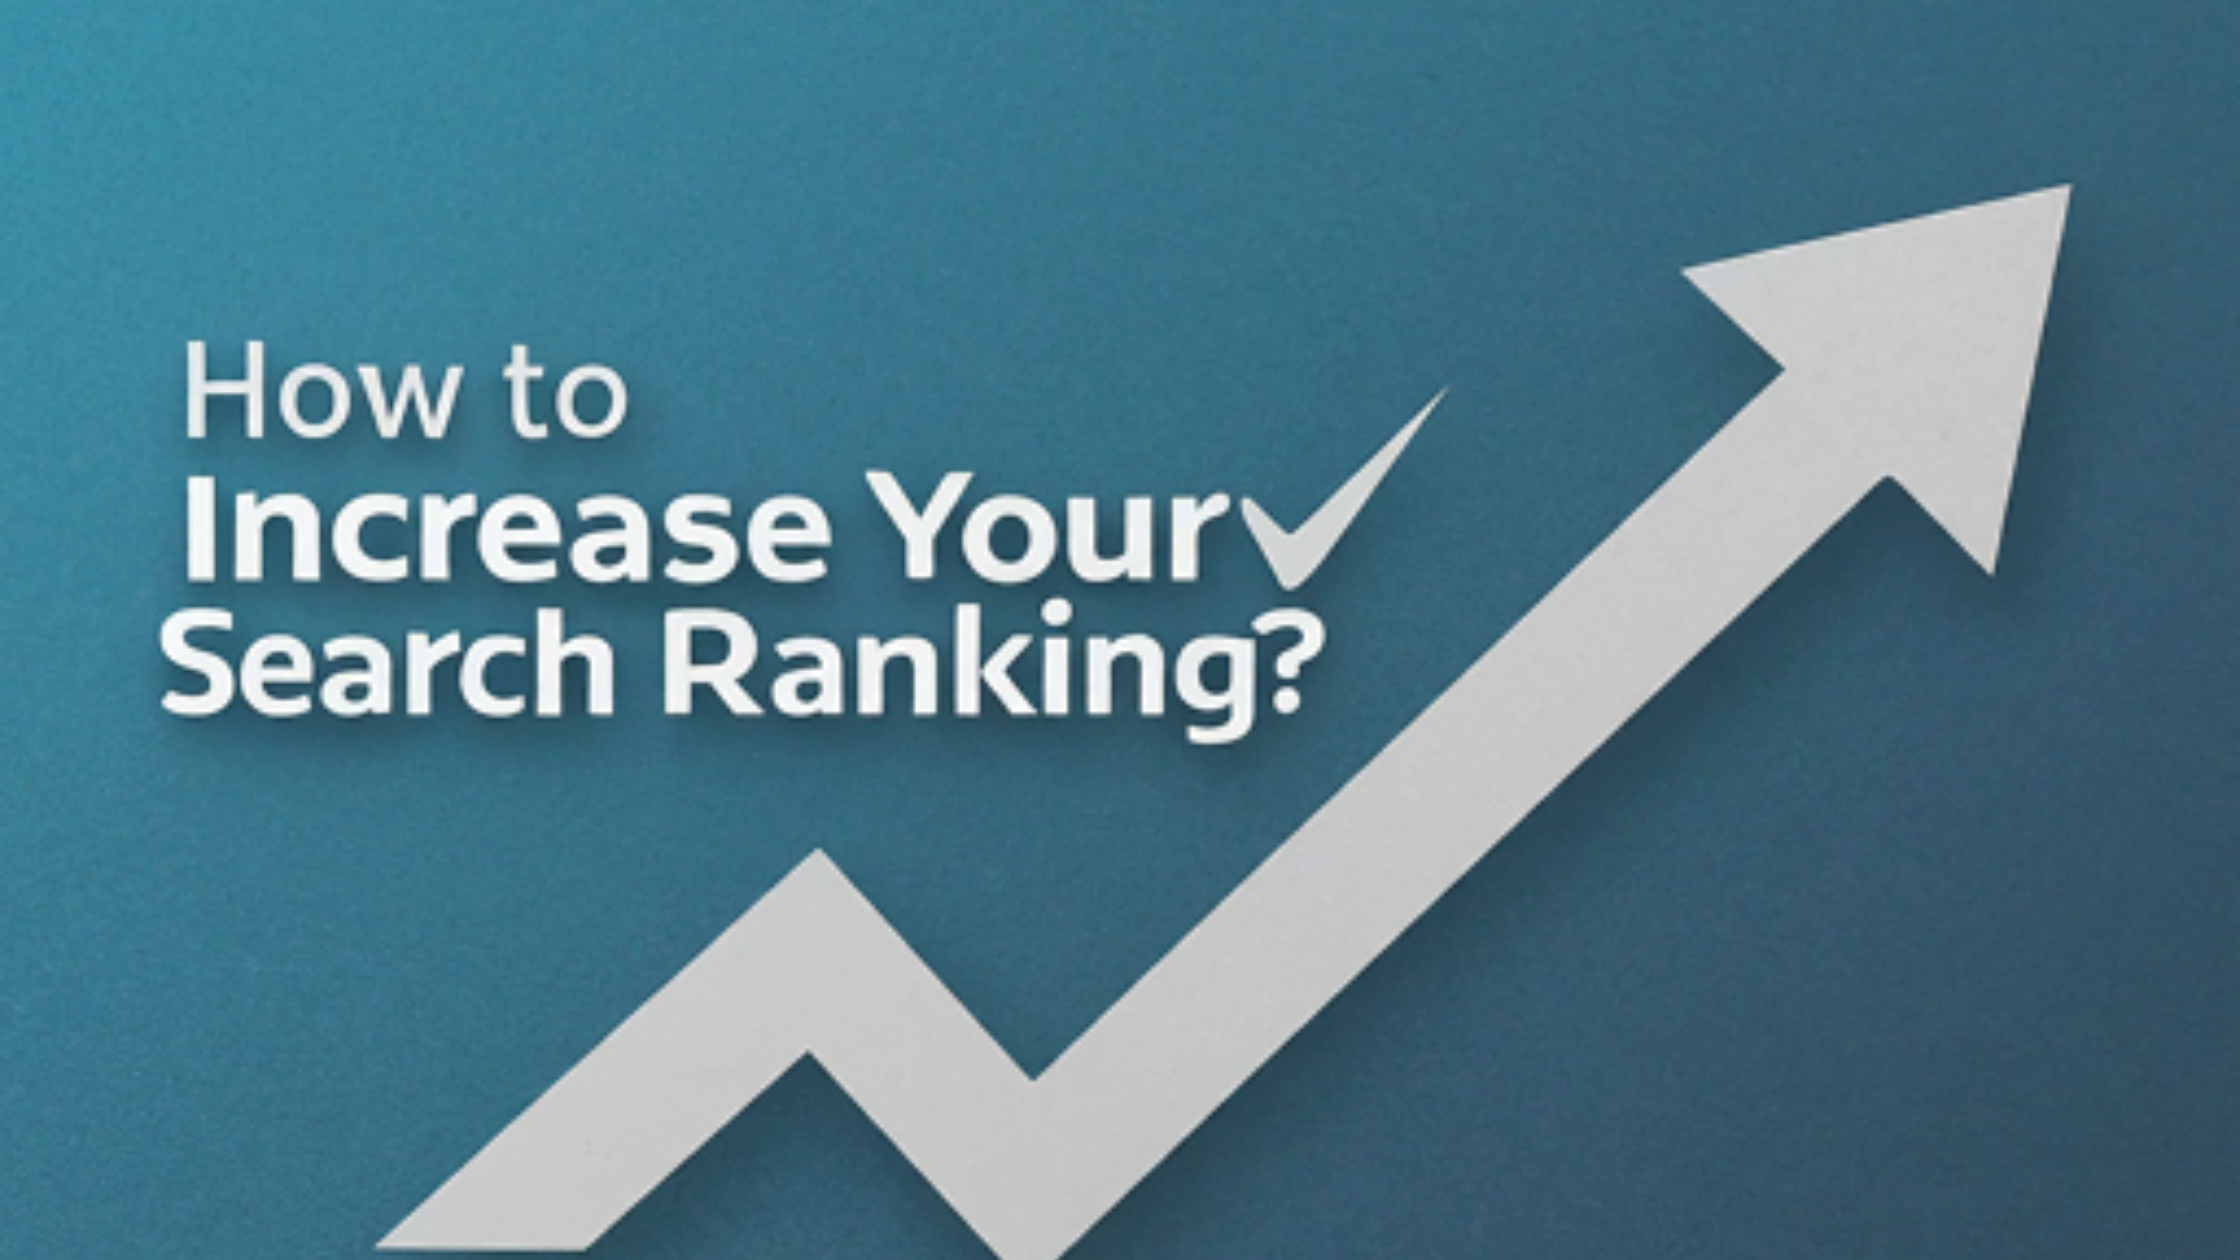 How to Increase Your Organic Search Ranking?